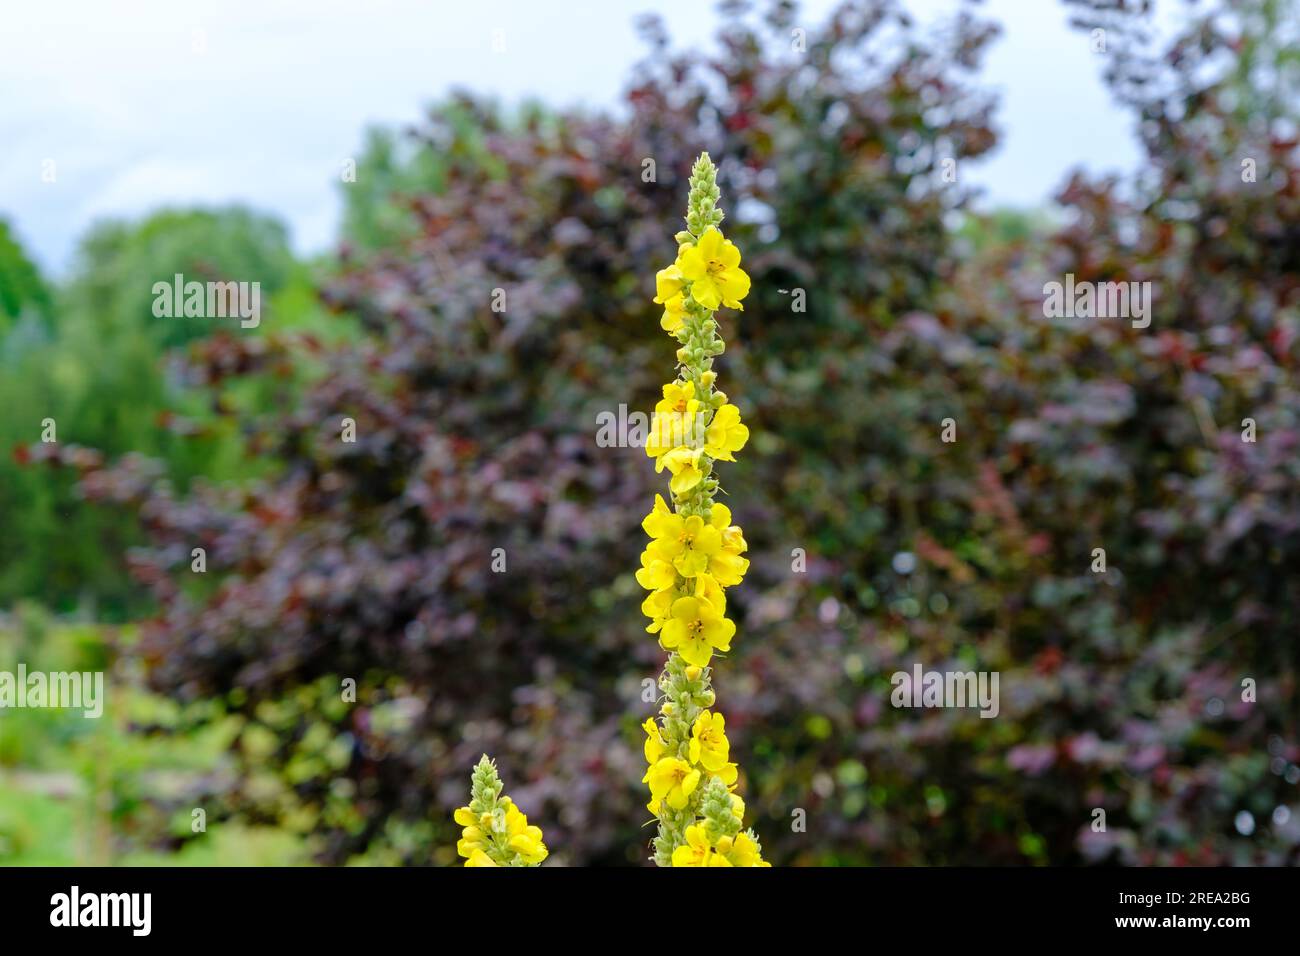 Yellow flowers of mullein, Verbascum densiflorum Bertol. in the family: Scrophulariaceae. Health drugs, medicinal plant. Stock Photo